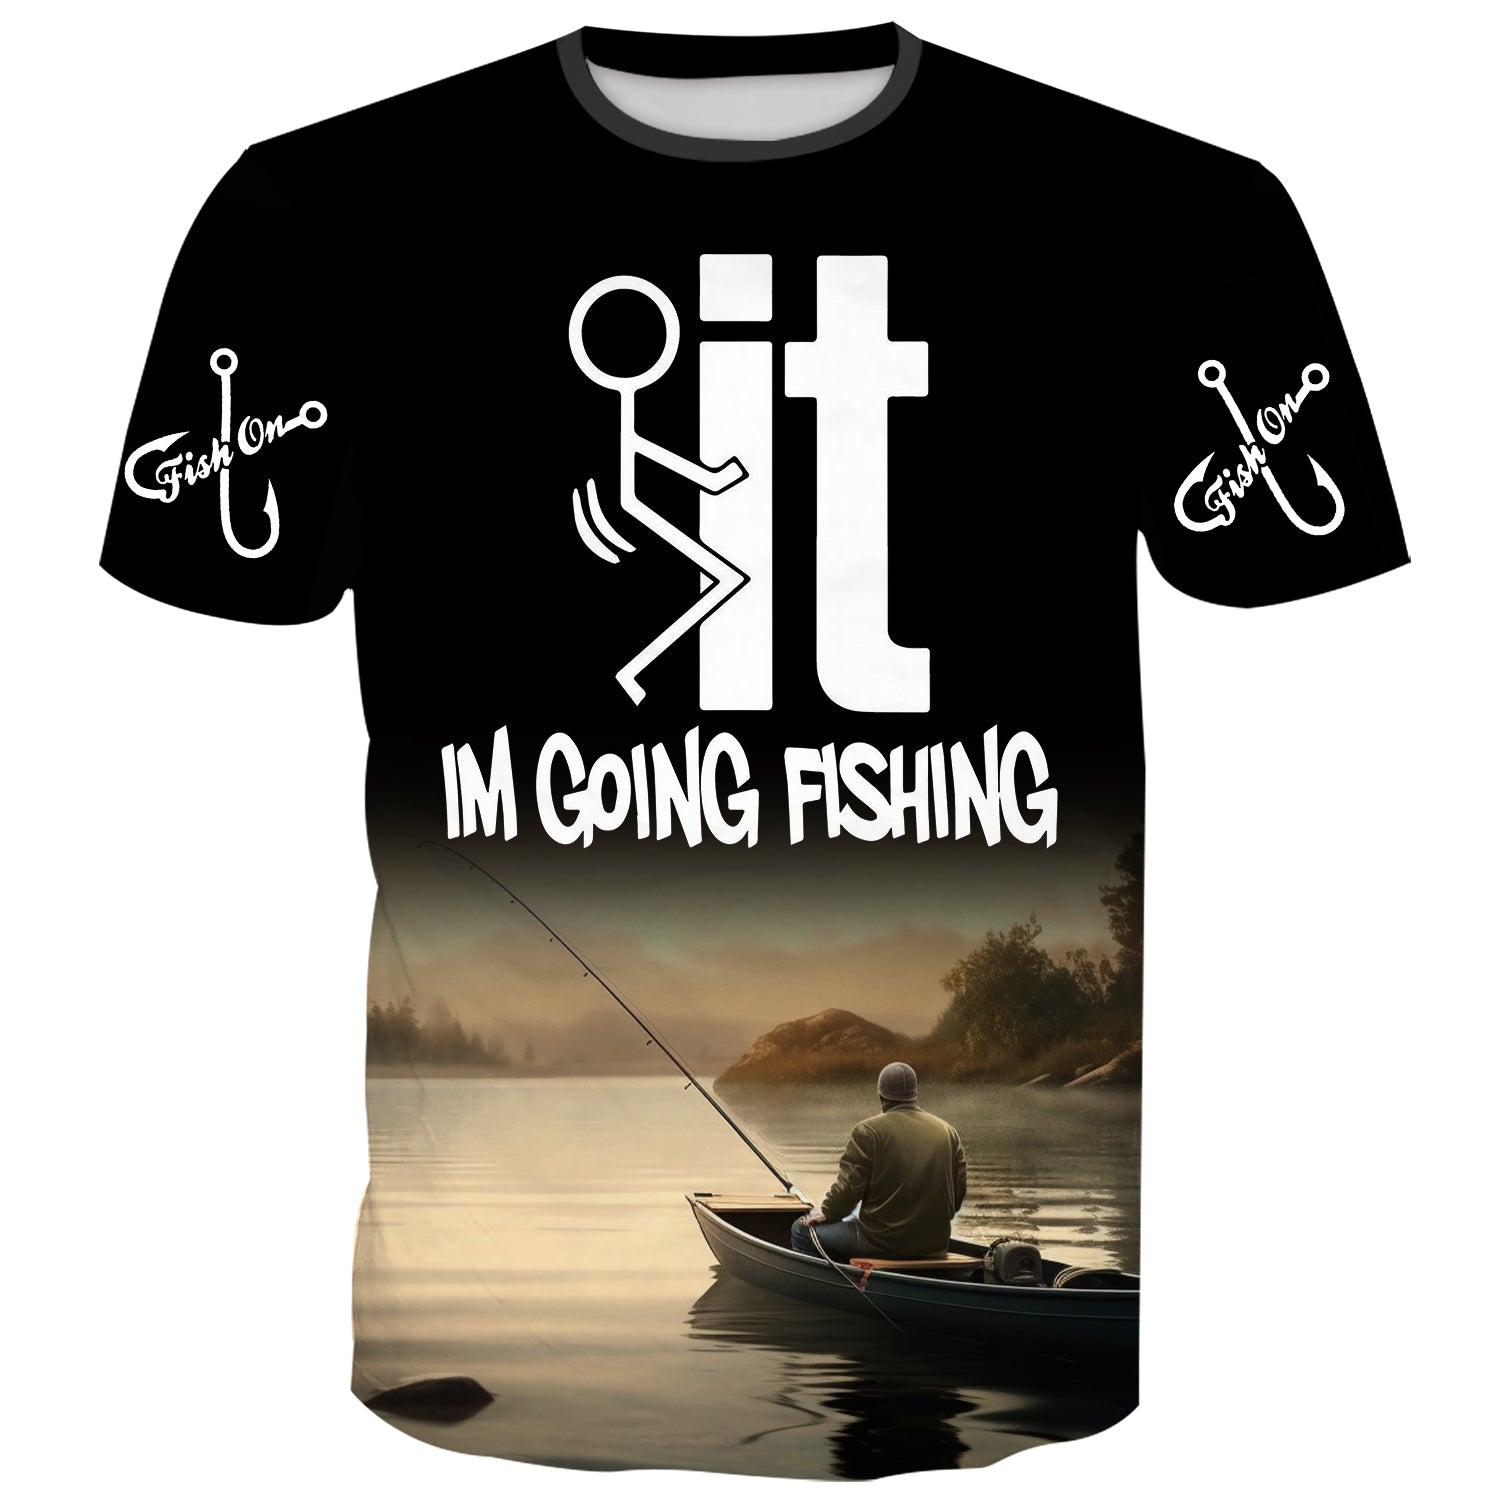 I am going Fishing T-Shirt for Men - Adventure-themed Tee, M